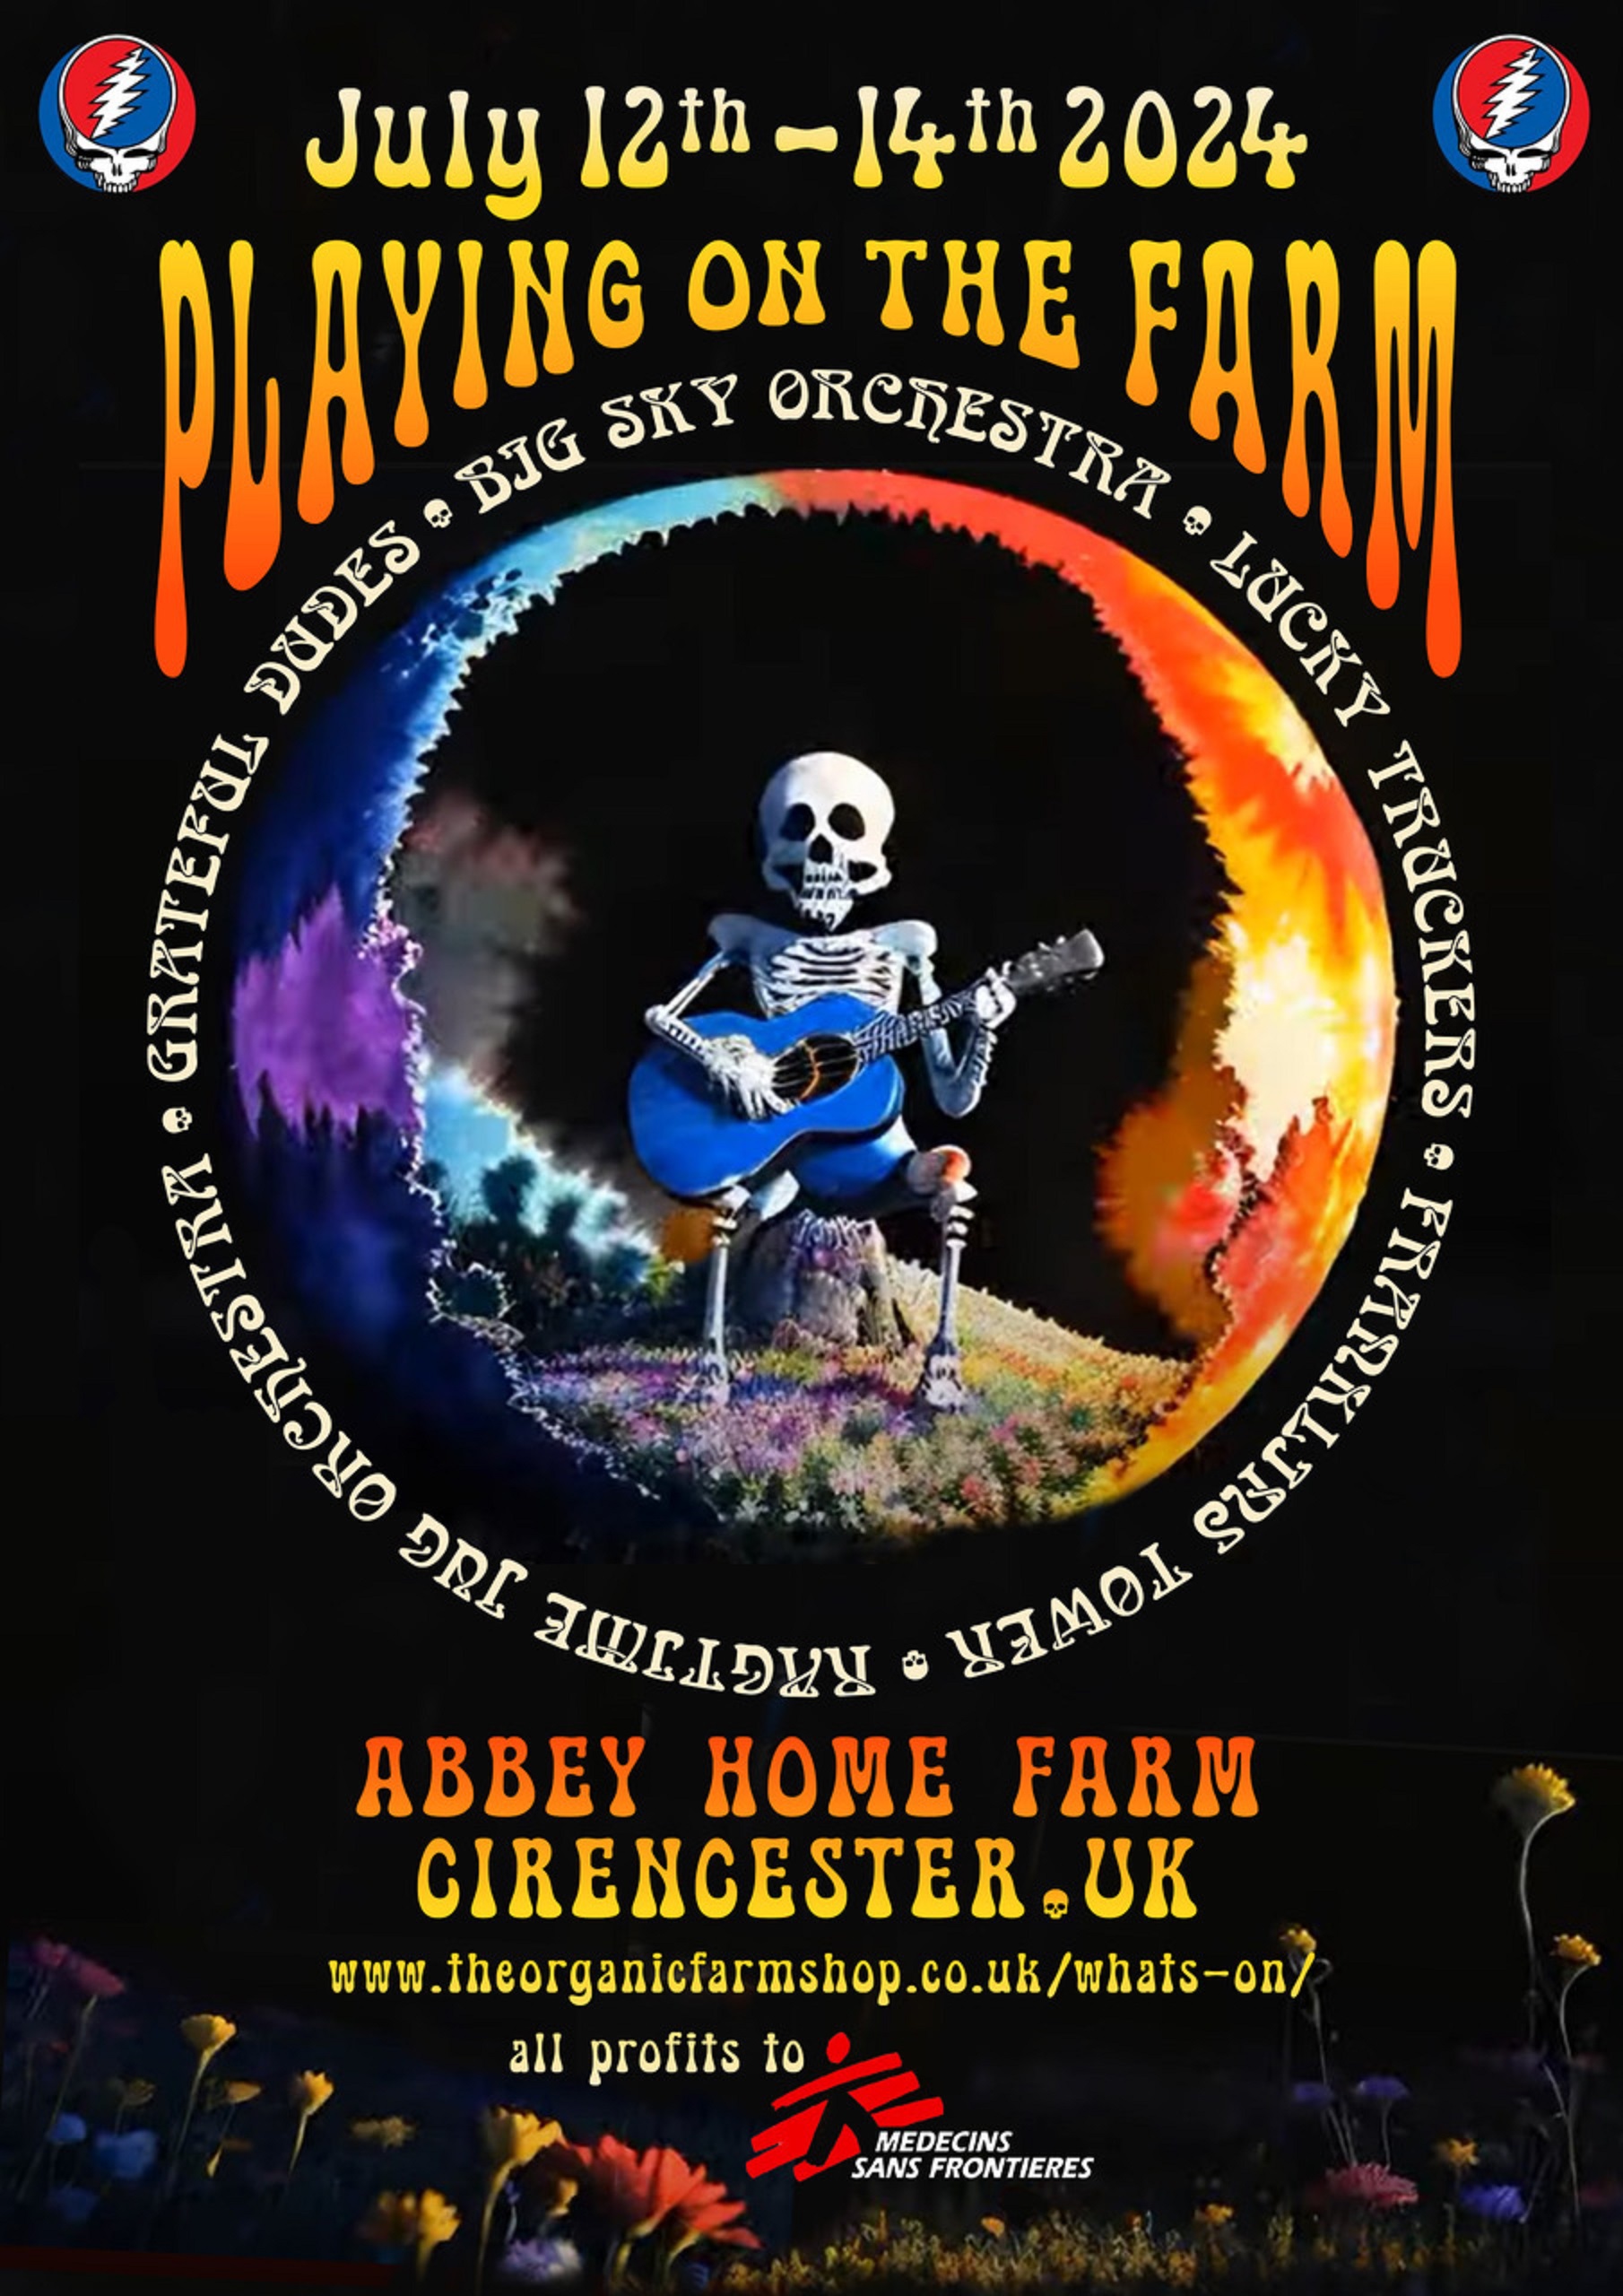 Experience the Magic of Playing On The Farm: The Ultimate Gathering for UK Deadheads